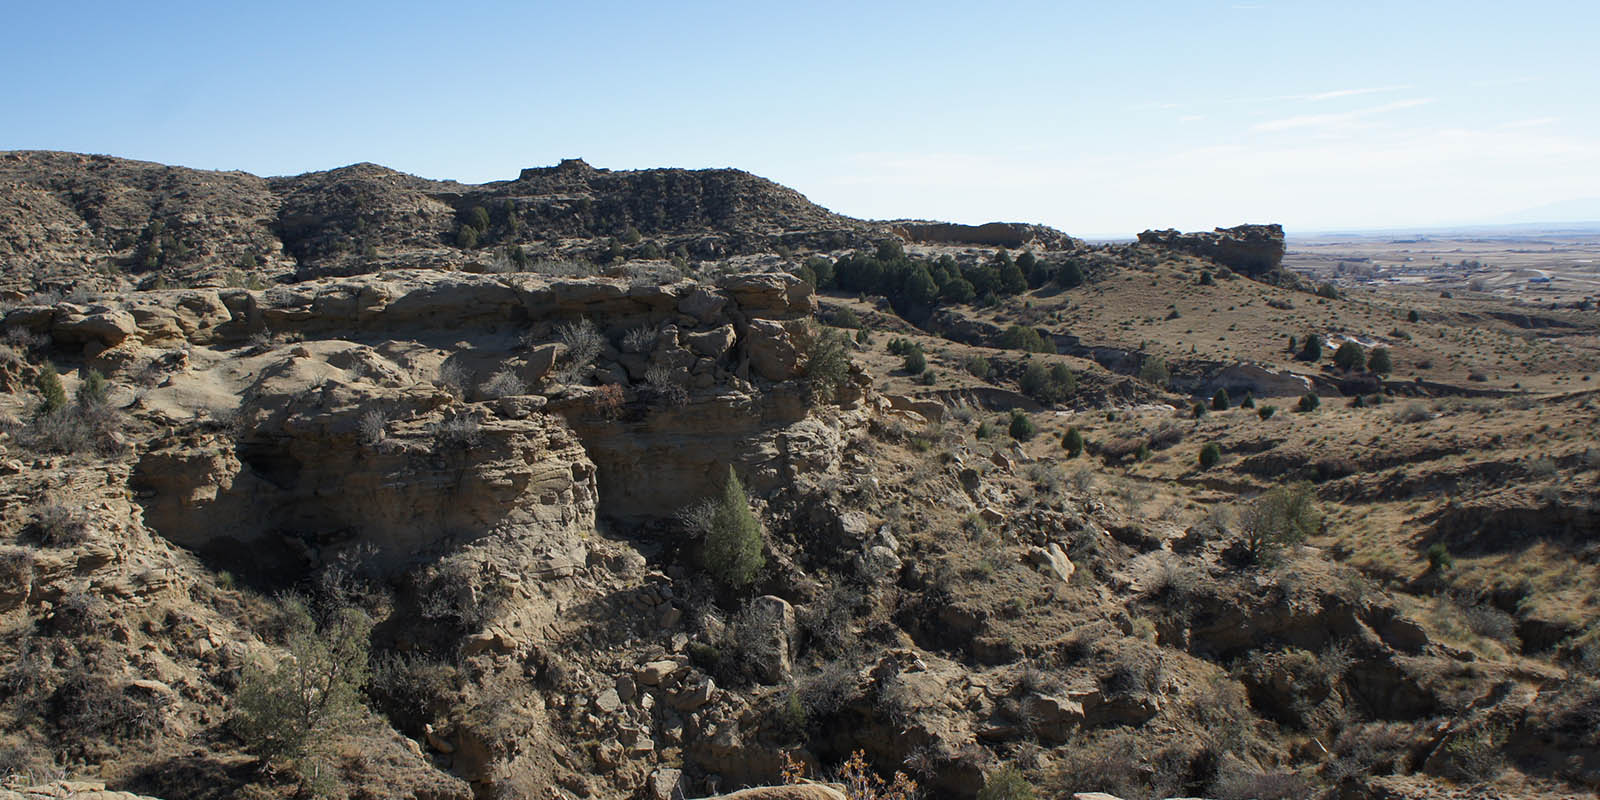 Image of dry landscape with large bluffs